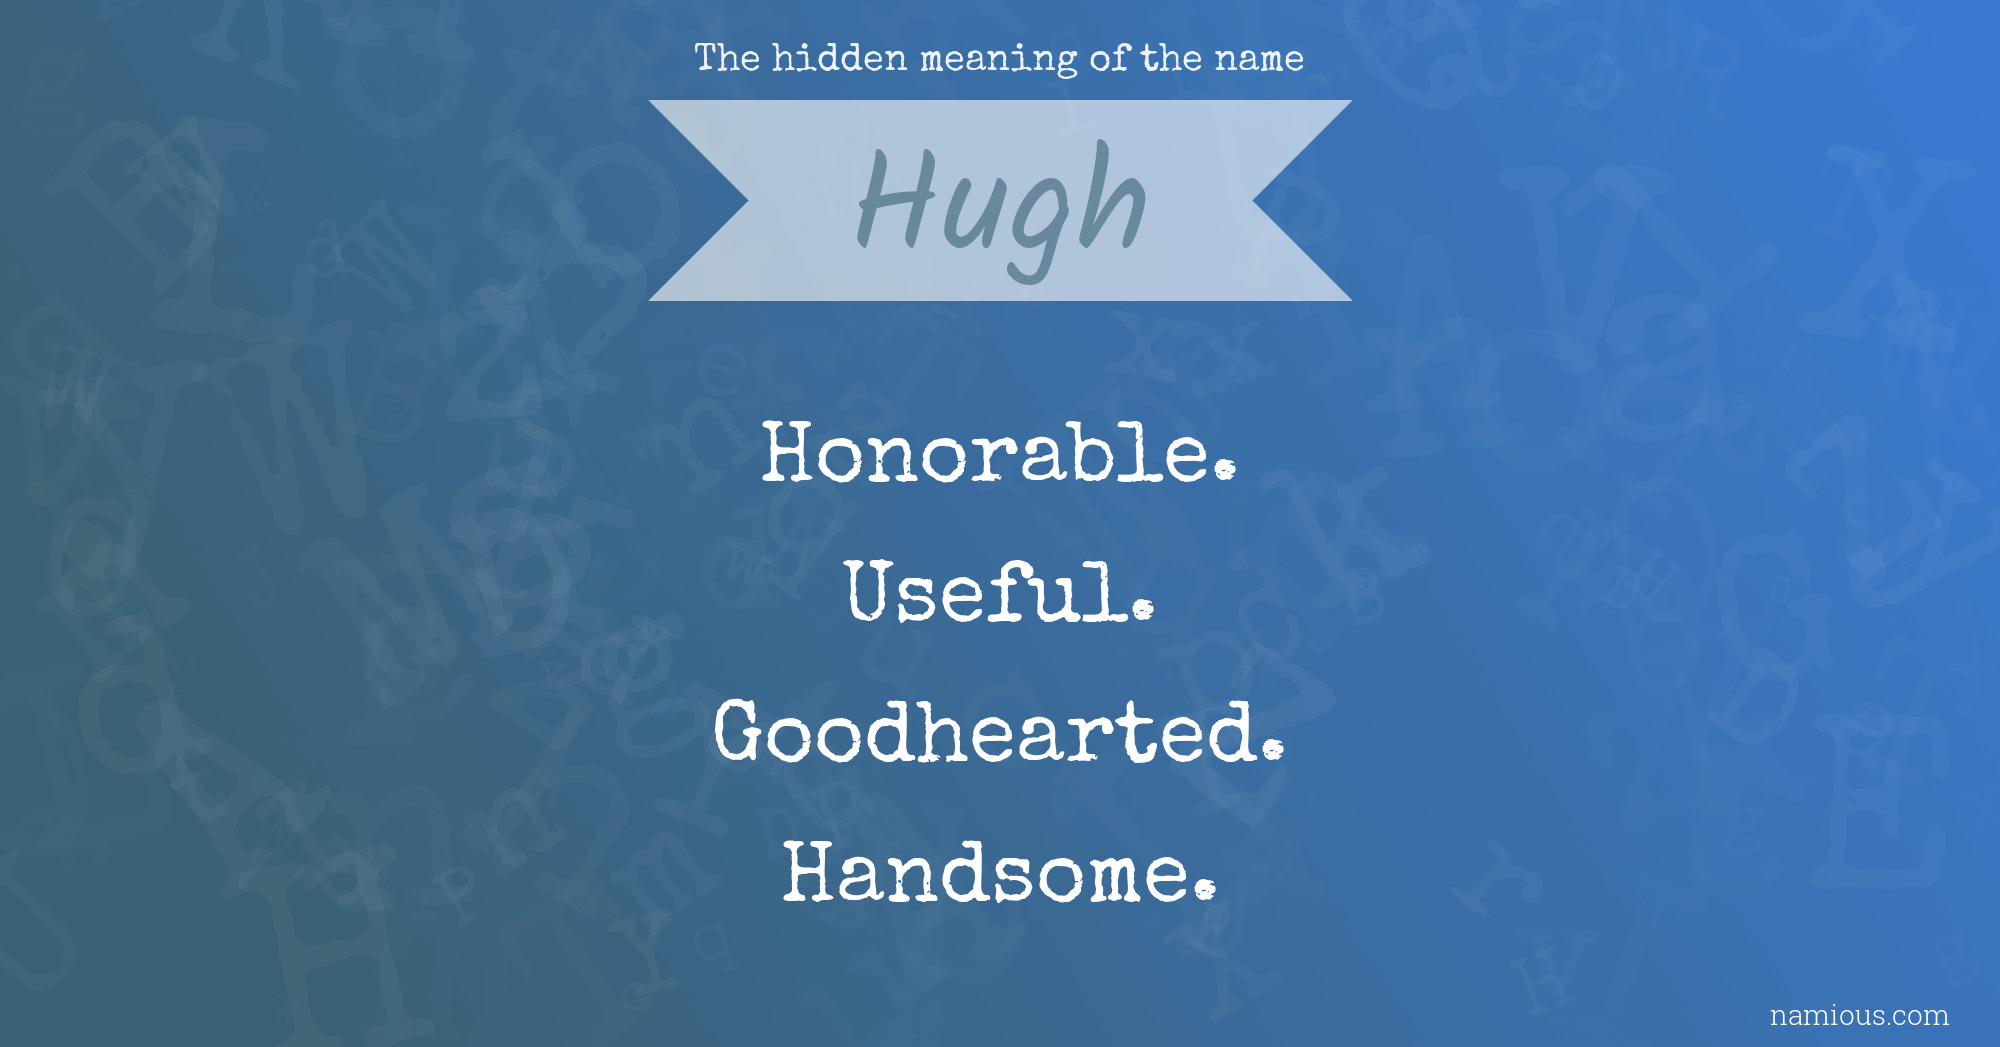 The hidden meaning of the name Hugh